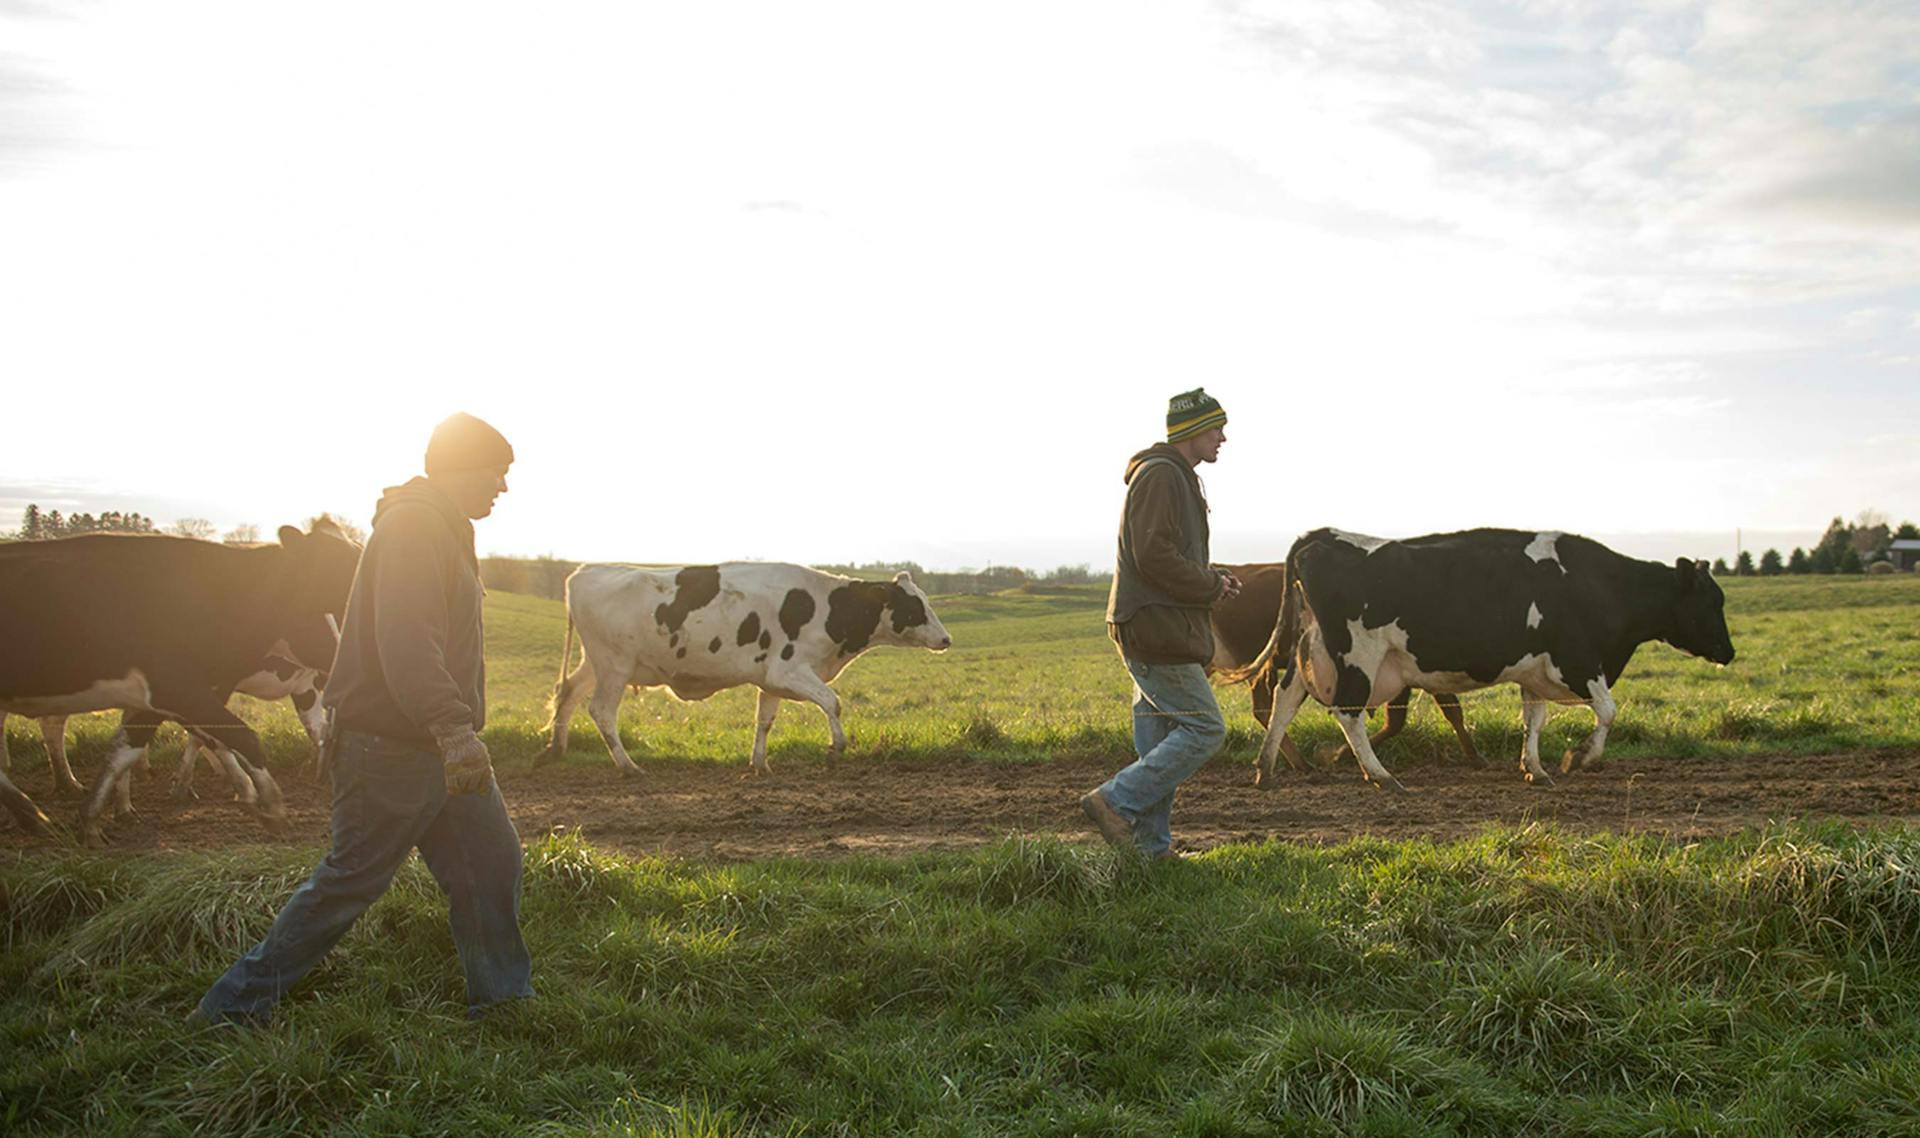 Two farmers walking through the field with a herd of cattle.